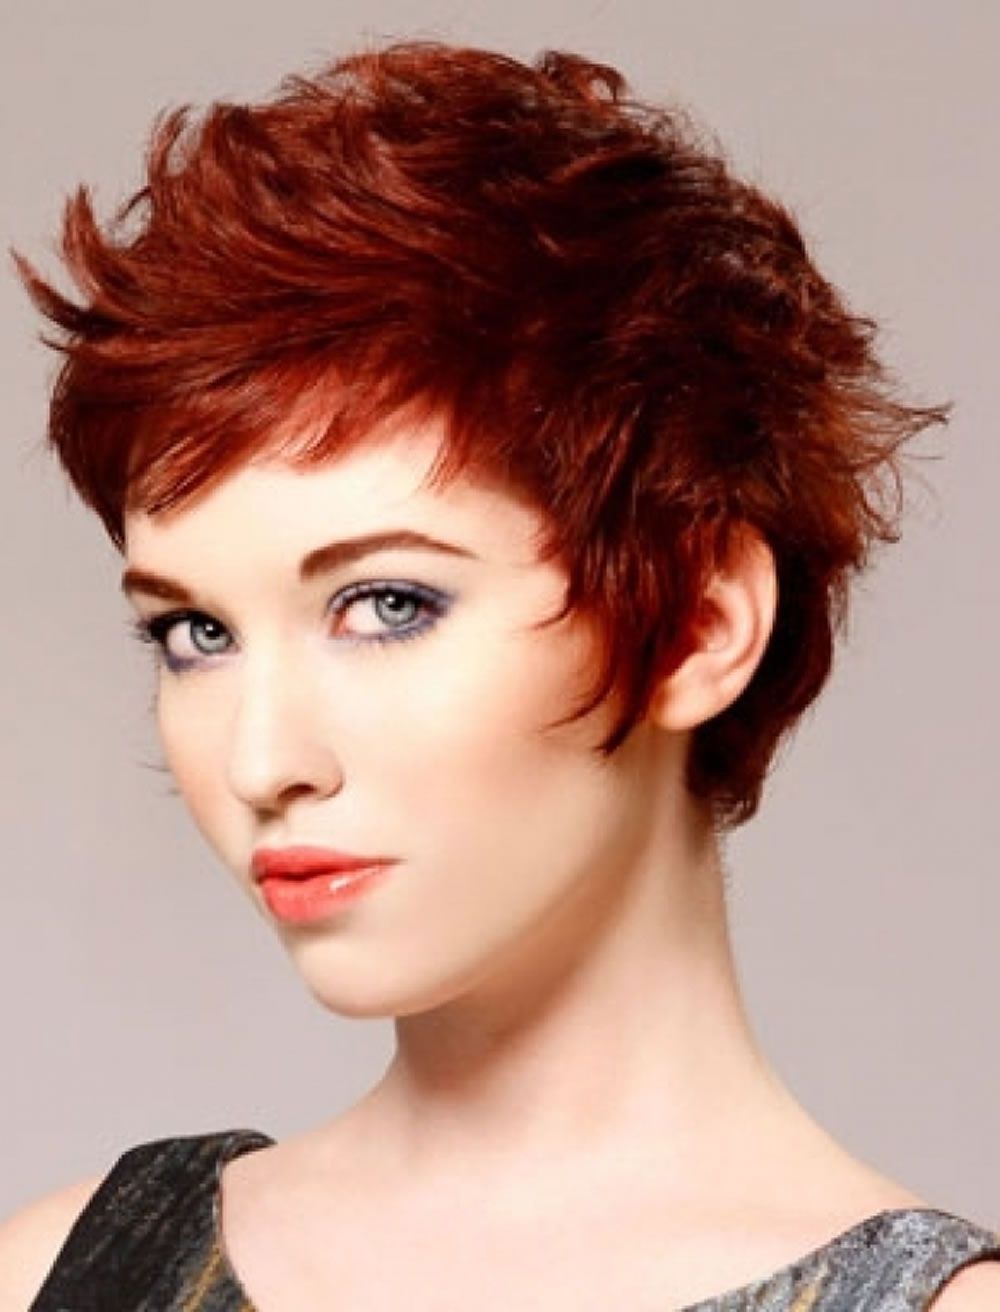 20 Short Haircuts For Red Hair New Design | Matsnilssonmma Pertaining To Short Hairstyles For Red Hair (View 7 of 25)